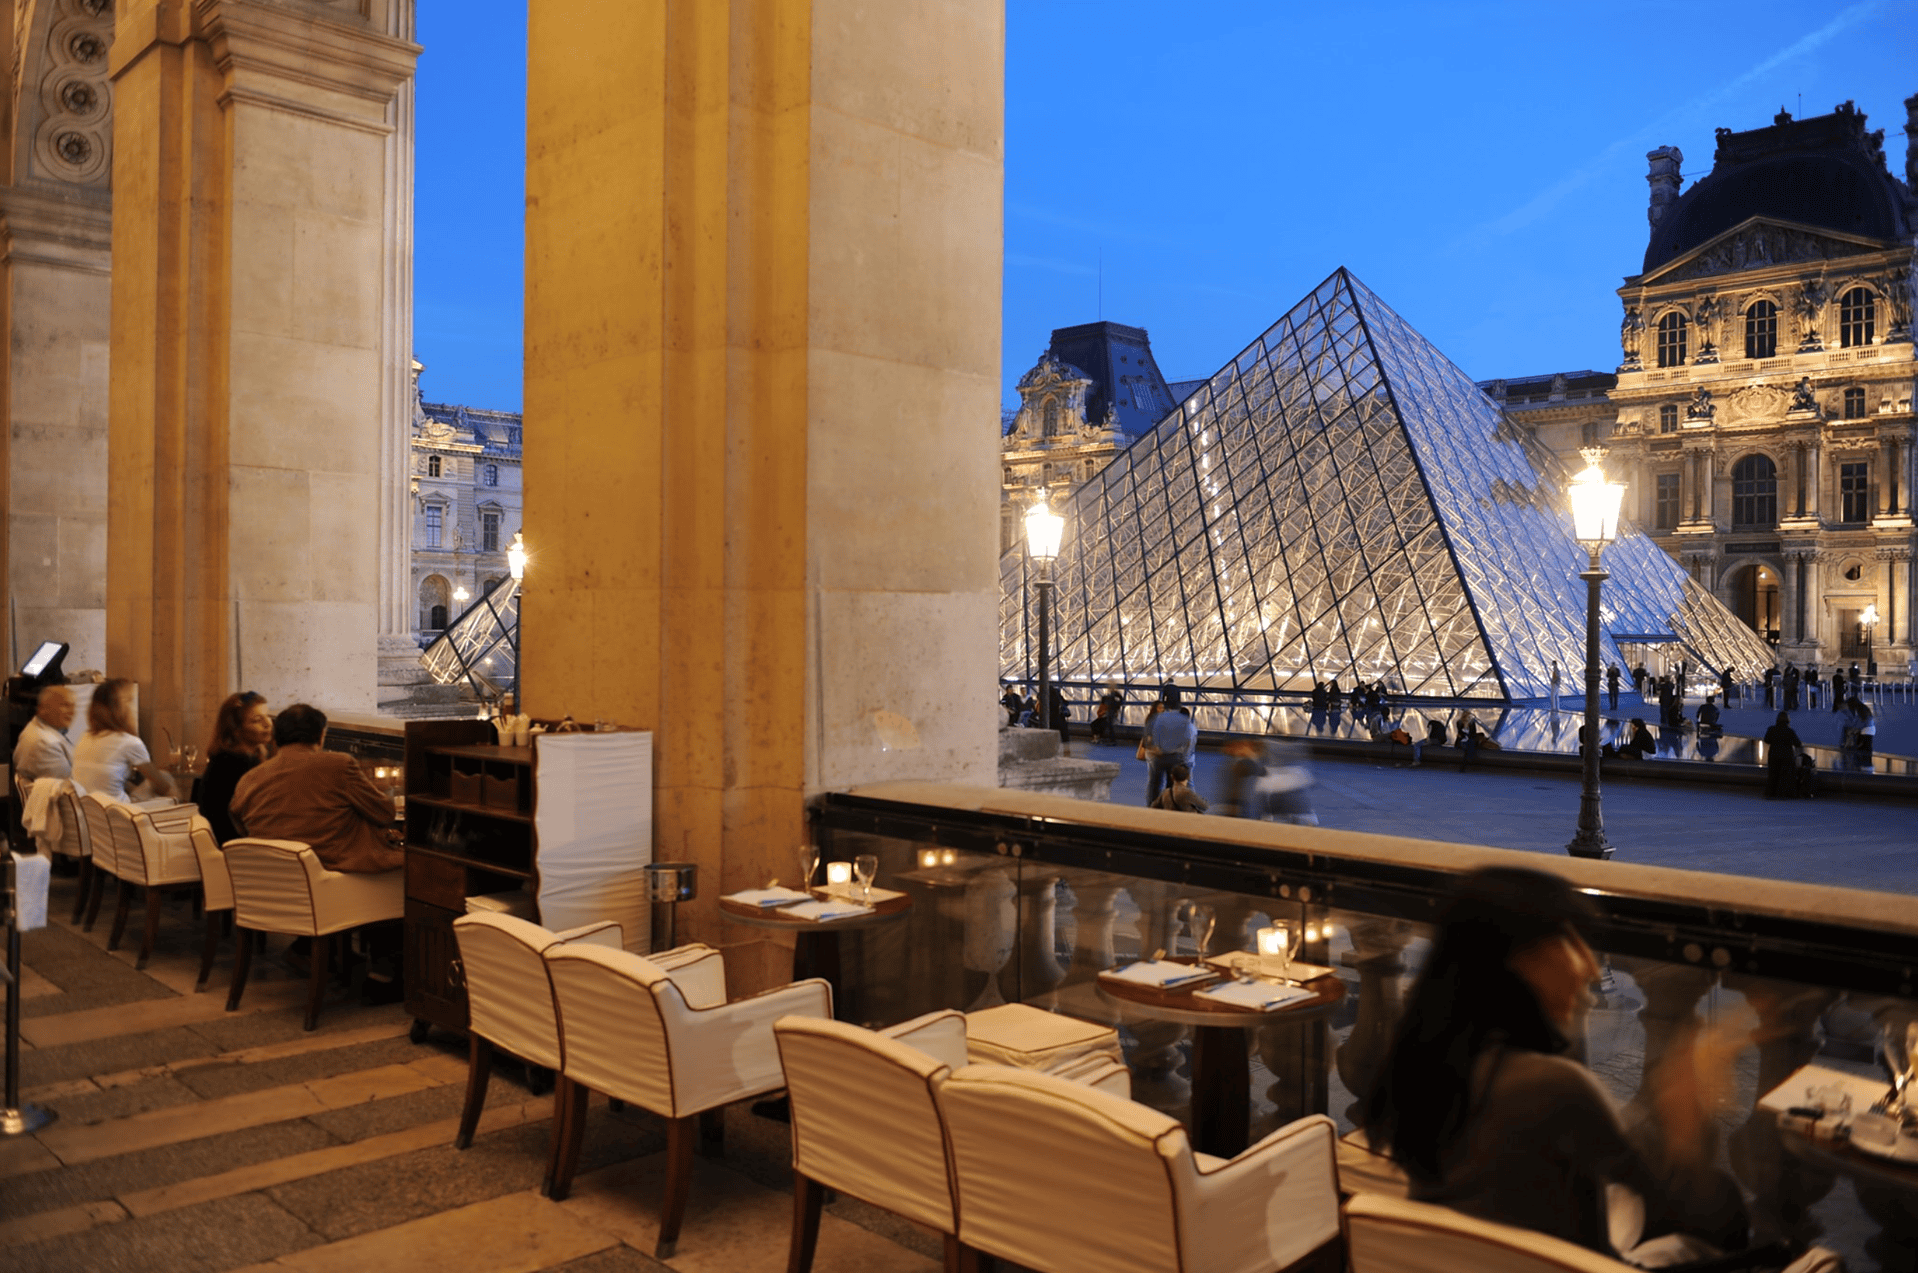 Cafe Marly at the Louvre in Paris, France.